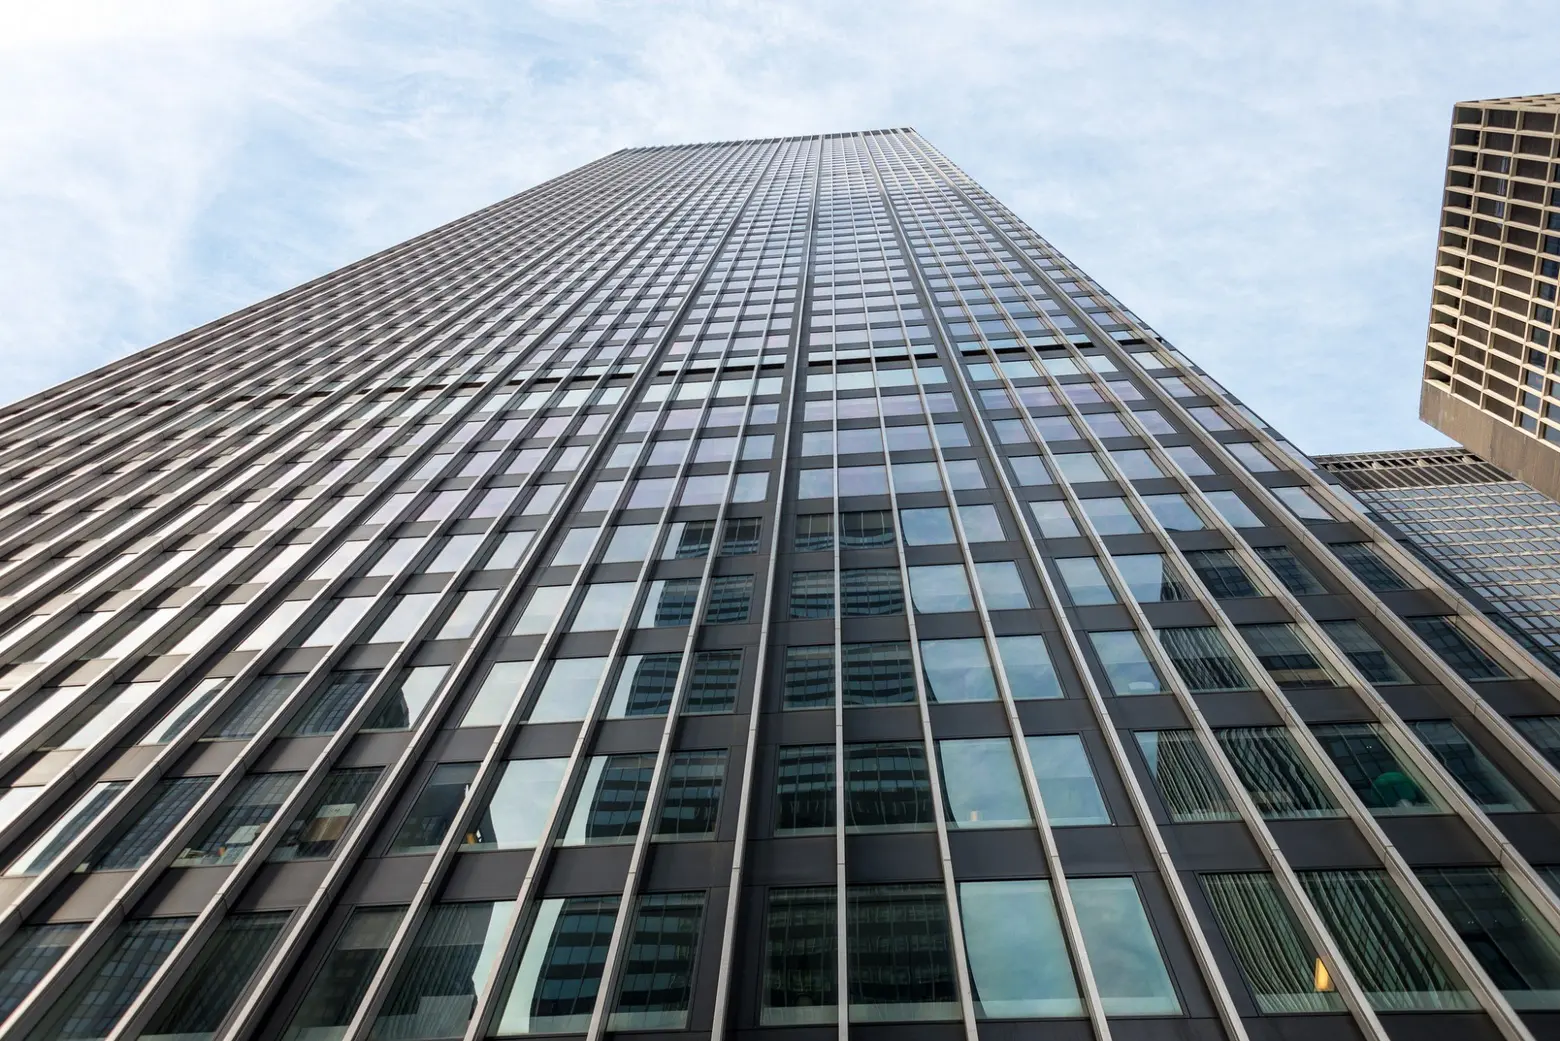 Demolition permits filed for world’s tallest teardown at 270 Park Avenue